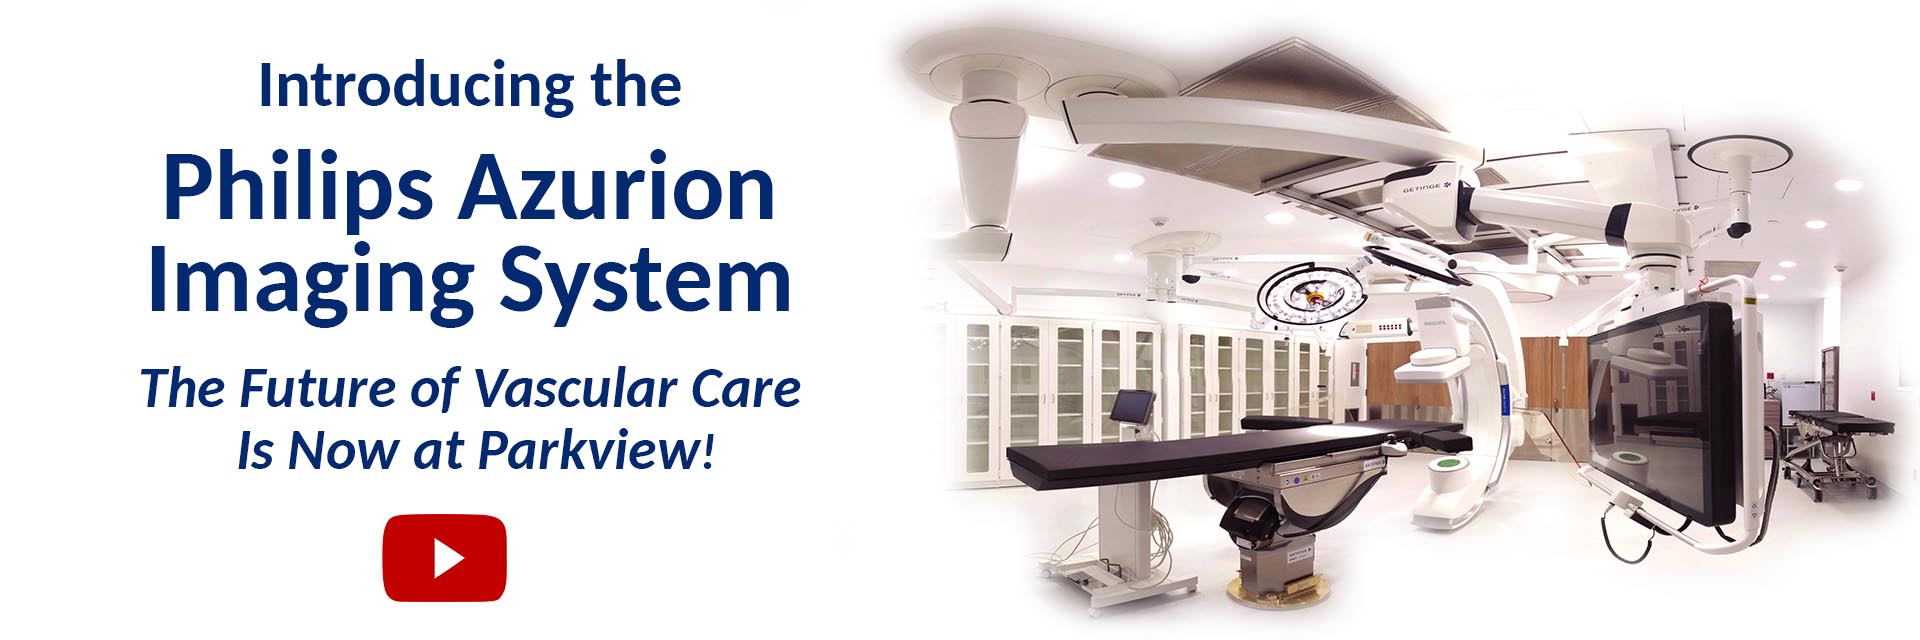 Introducing the Philips Azurion Imaging System

The Future of Vascular Care is Now at Parkview
(youtube start link)